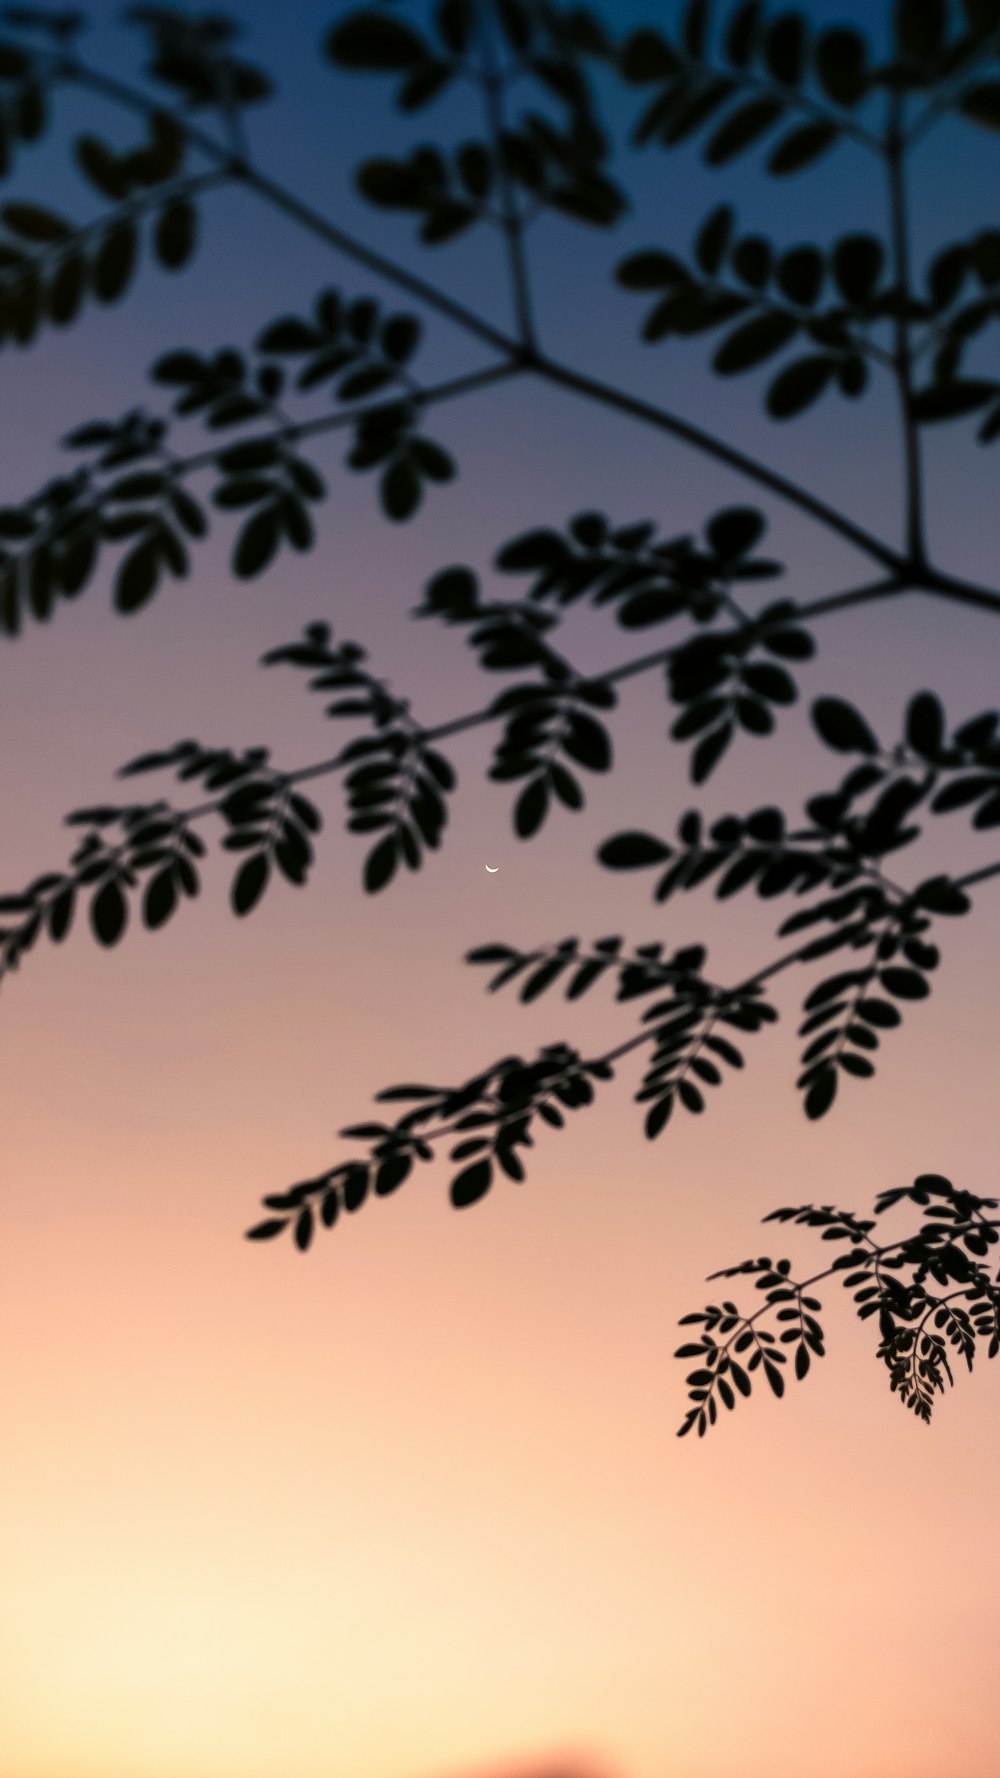 the silhouette of a tree branch against a sunset sky